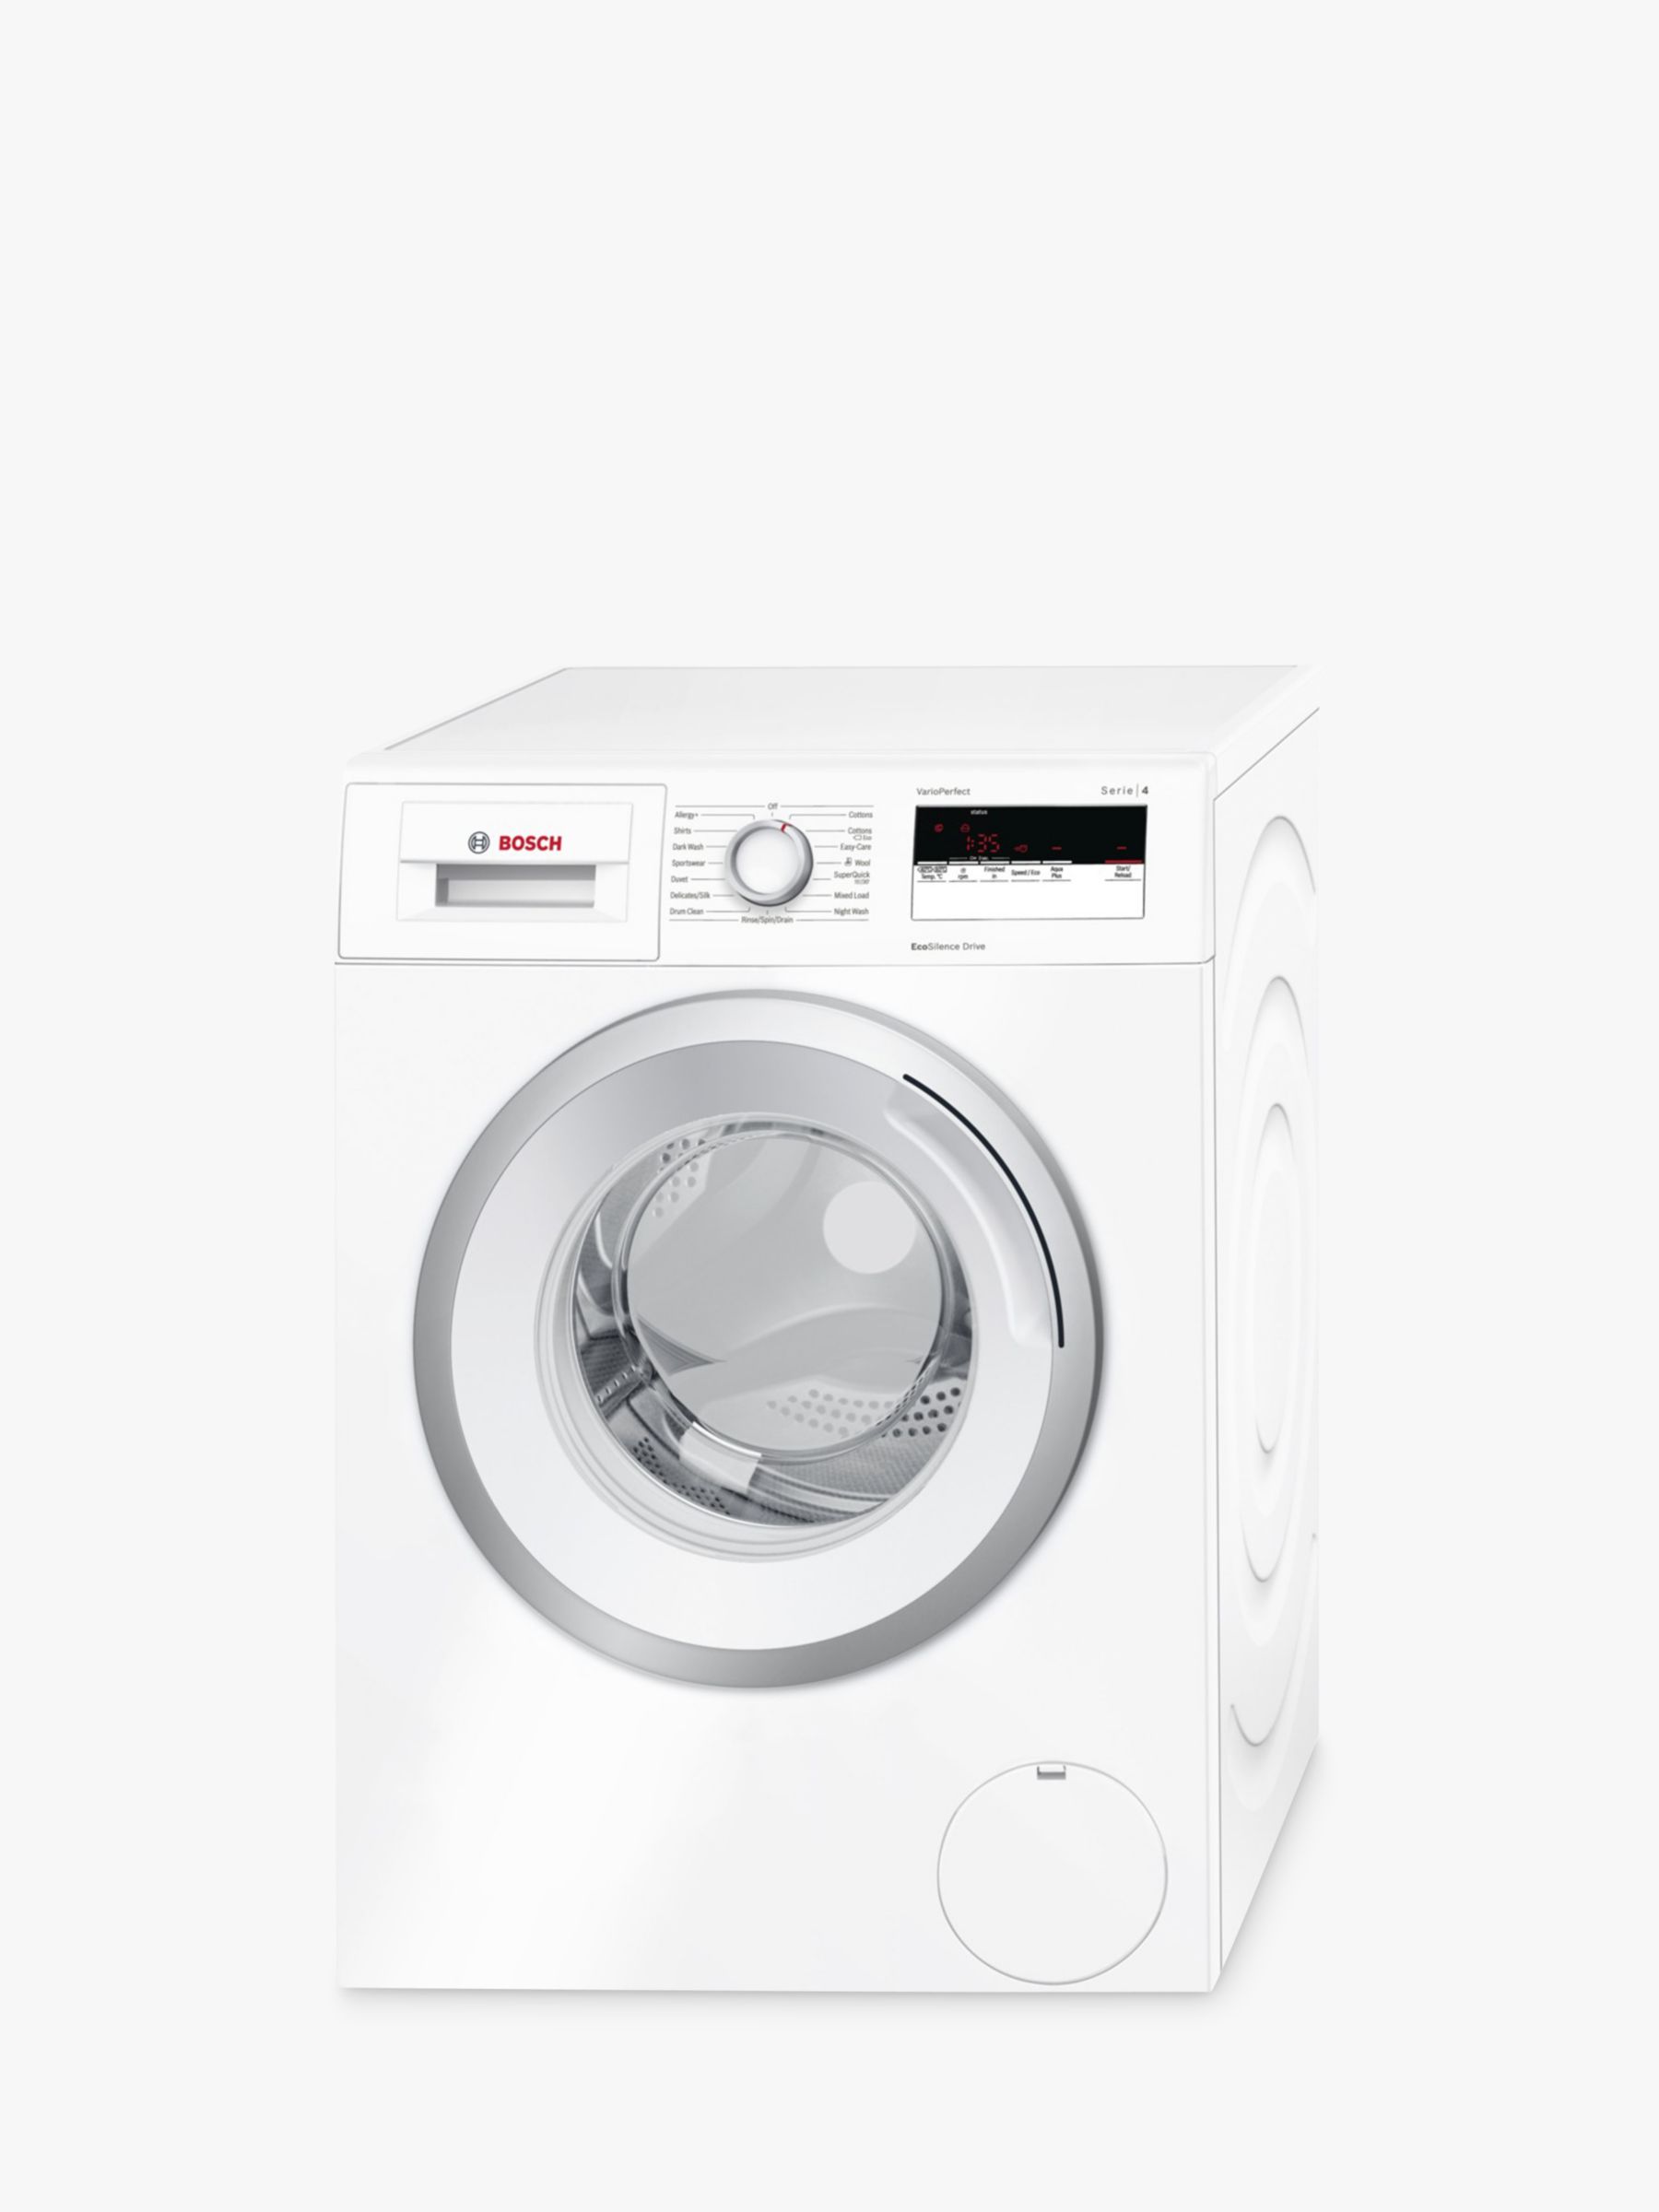 Bosch WAN28100GB Freestanding Washing Machine, 7kg Load, A+++ Energy Rating, 1400rpm Spin, White